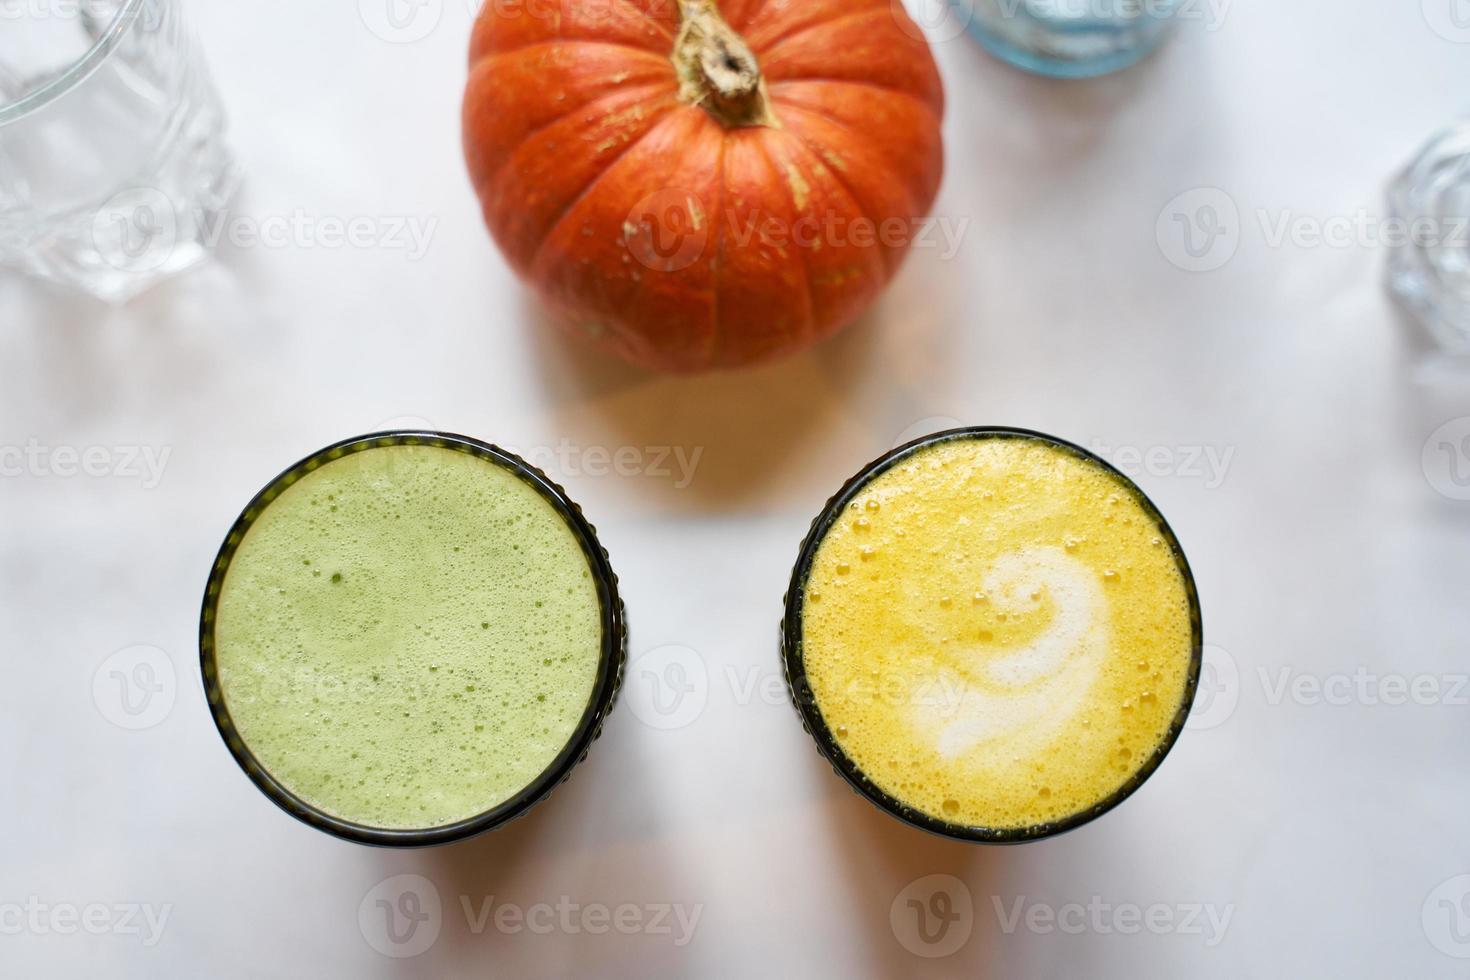 Healthy drink turmeric and ginger yellow latte with coconut milk and vegan matcha latte with green tea and oat milk, top view, white background photo